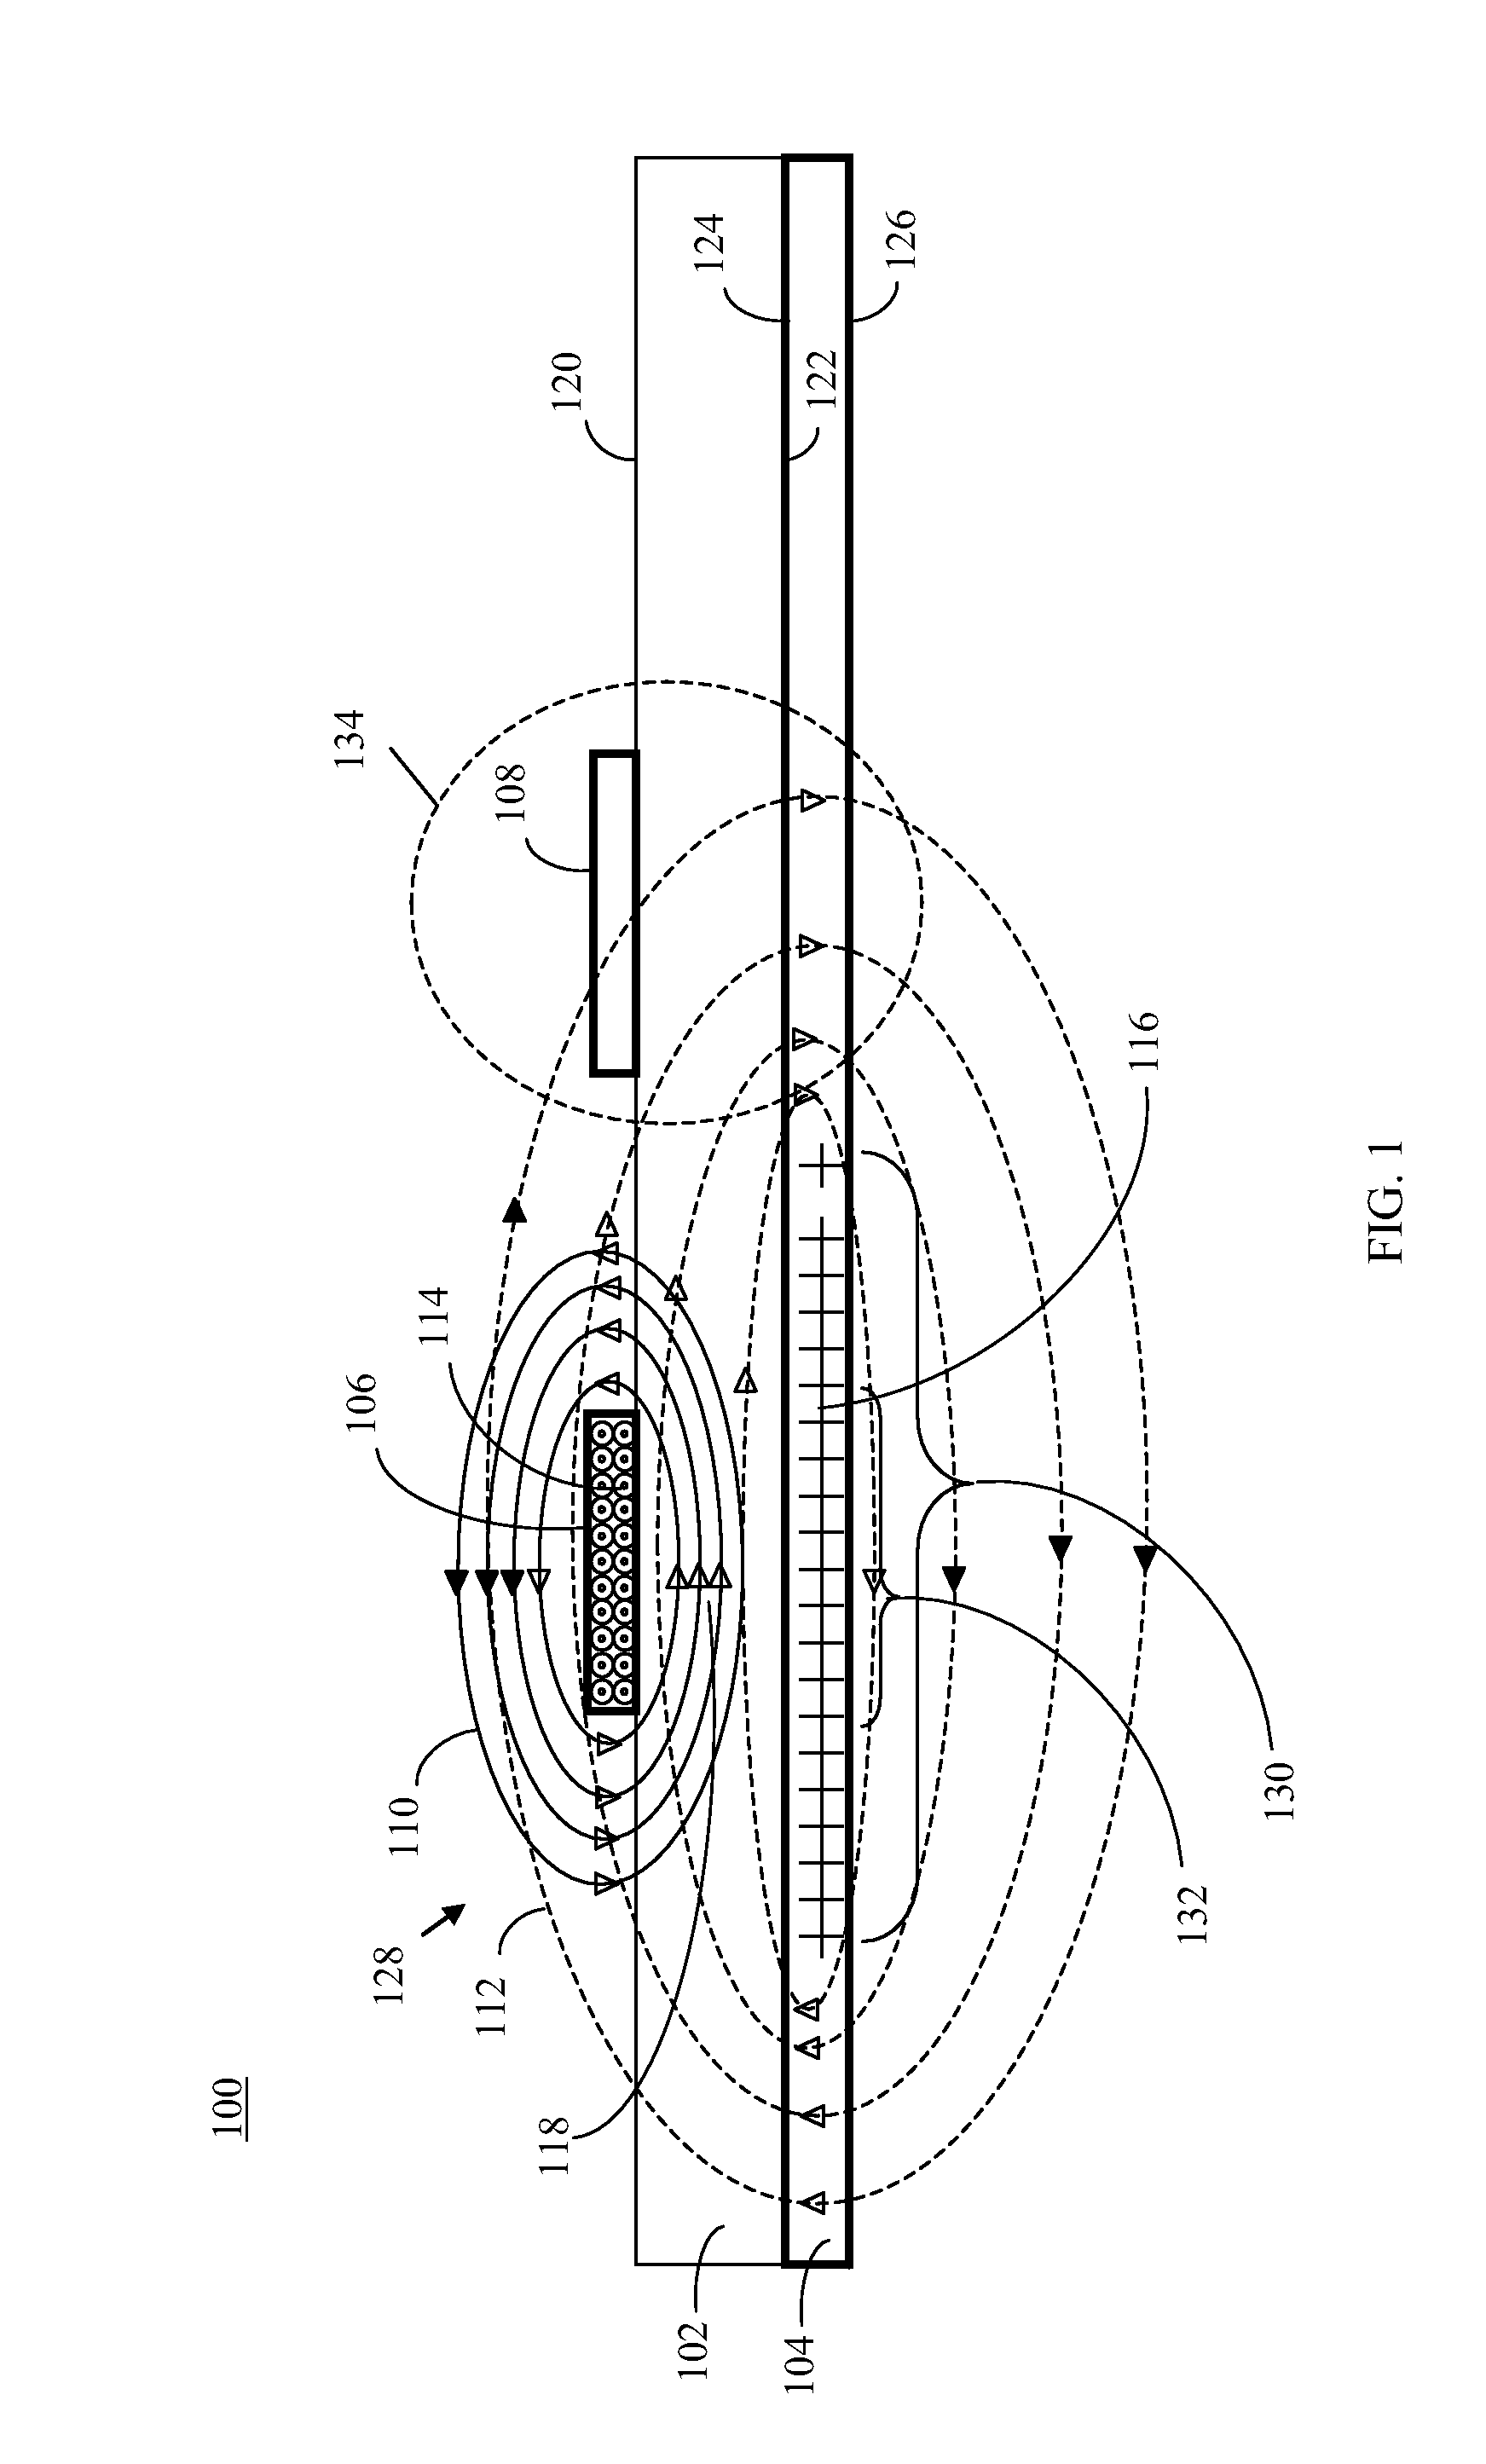 Mutual capacitance and magnetic field distribution control for transmission lines